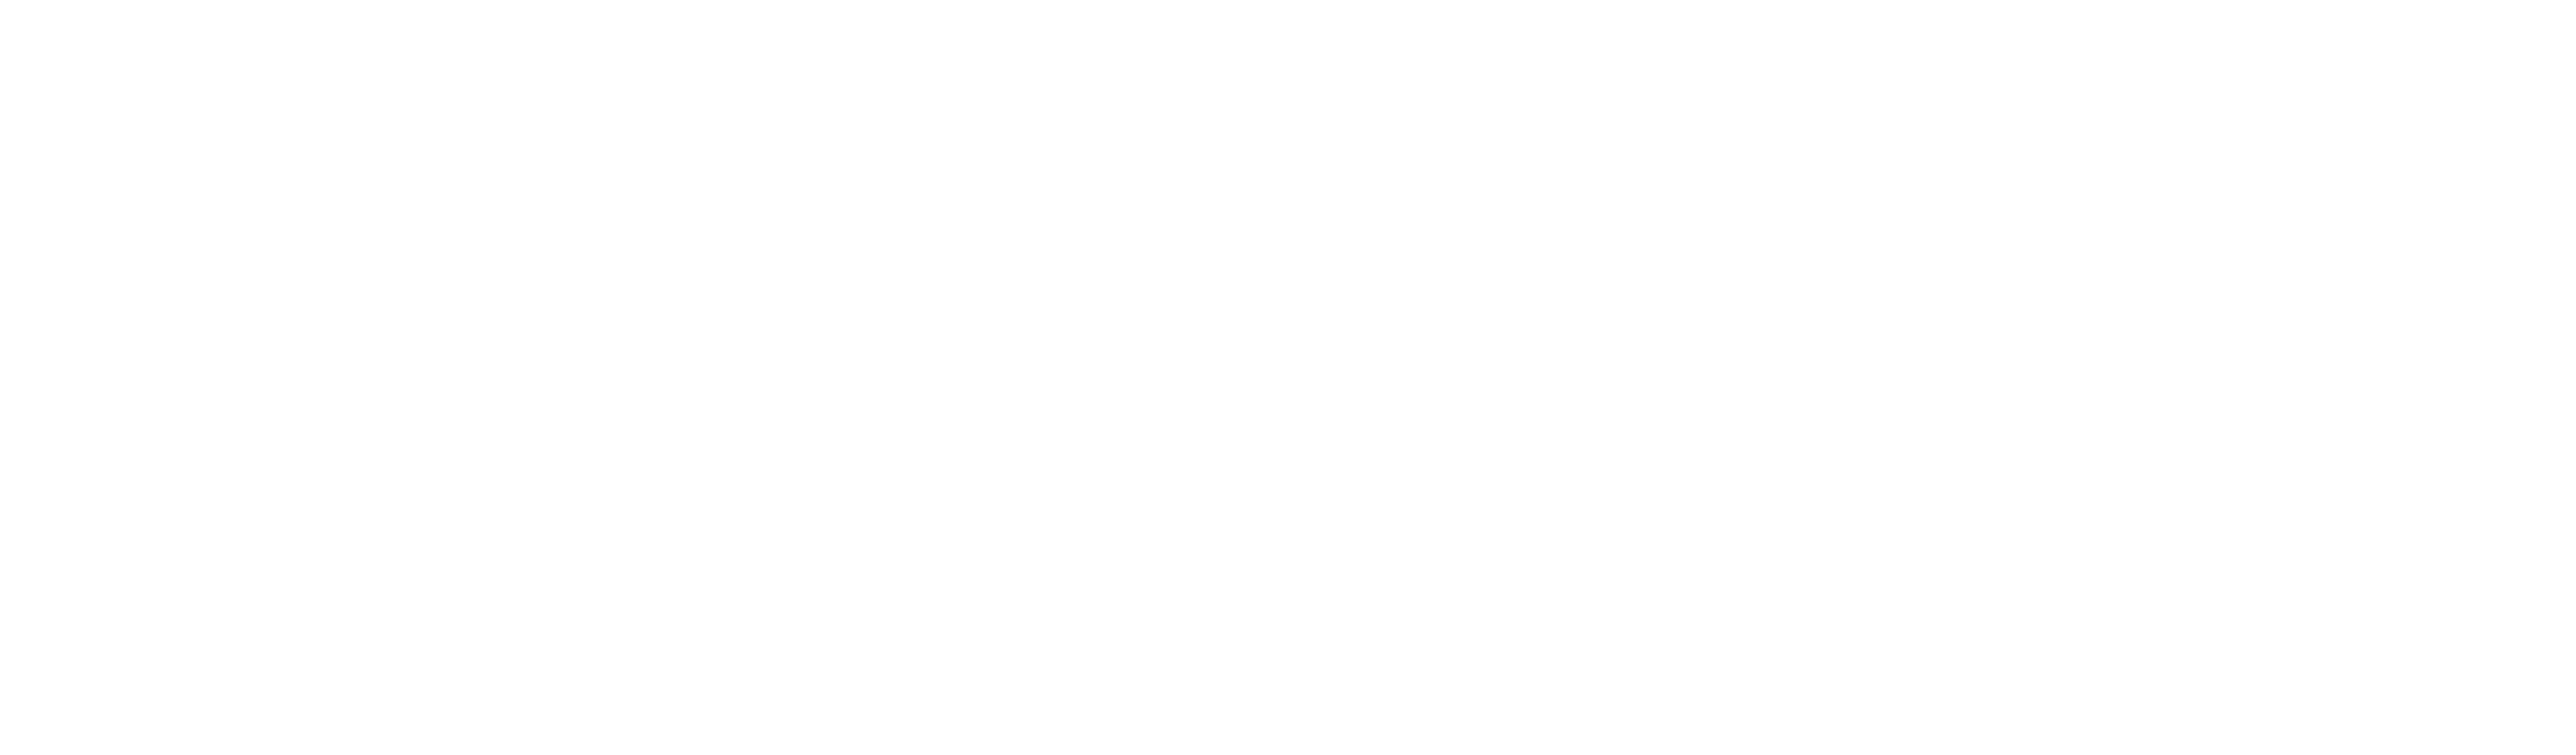 The Source Cards logo